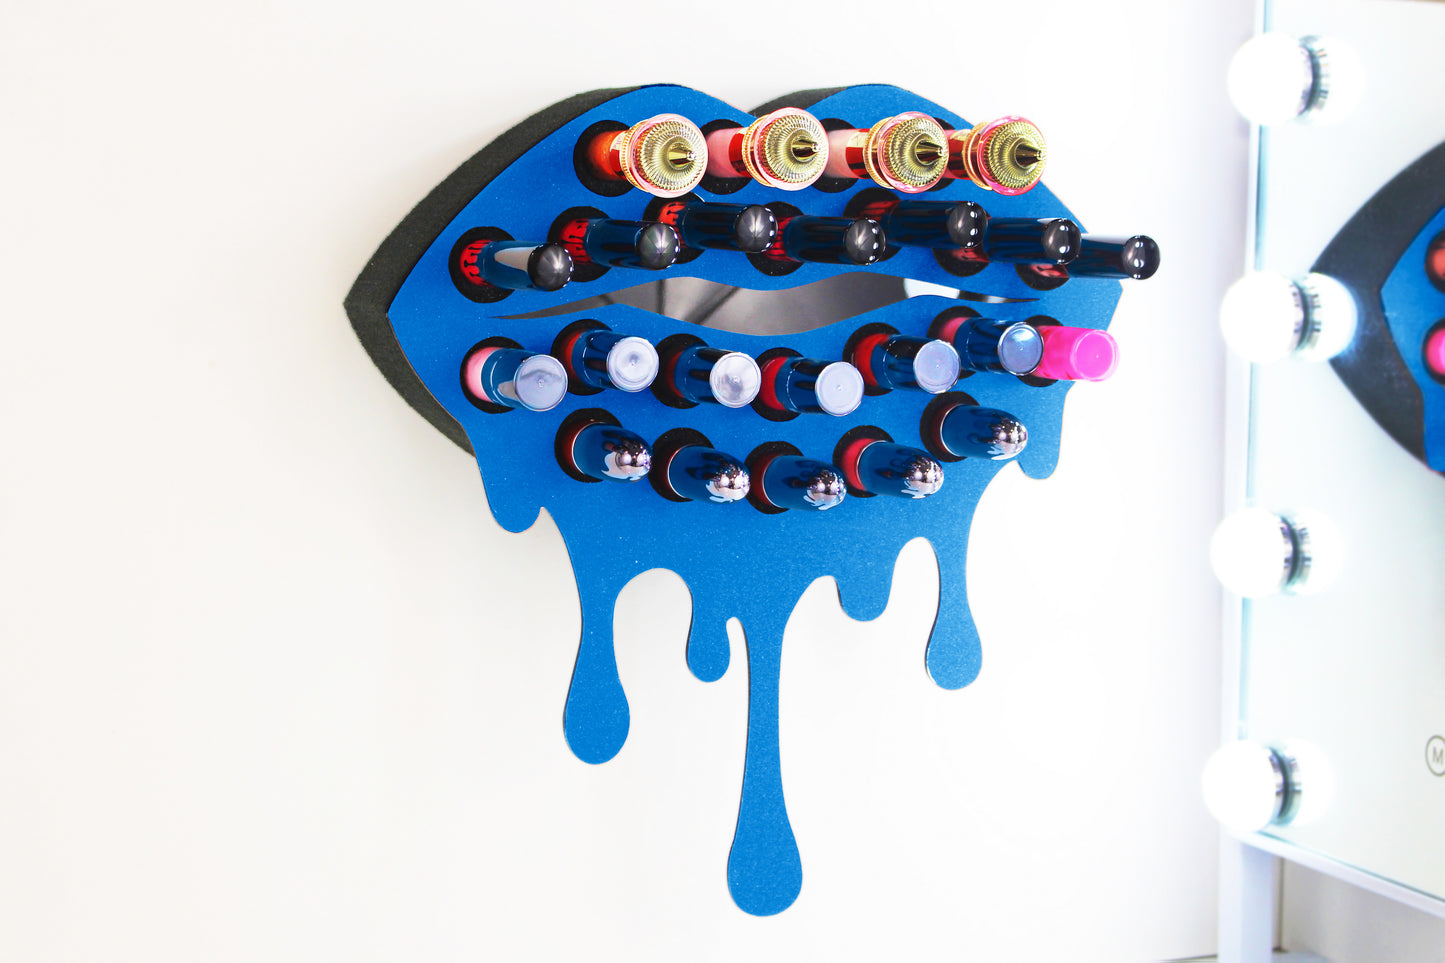 Blue Medium Lip Design Lipstick Organizer holding 23 lipsticks mounted on the wall, keeping lipstick organized and easy to reach. This wall mounted makeup organizer looks like art on the wall of your bathroom or makeup room.